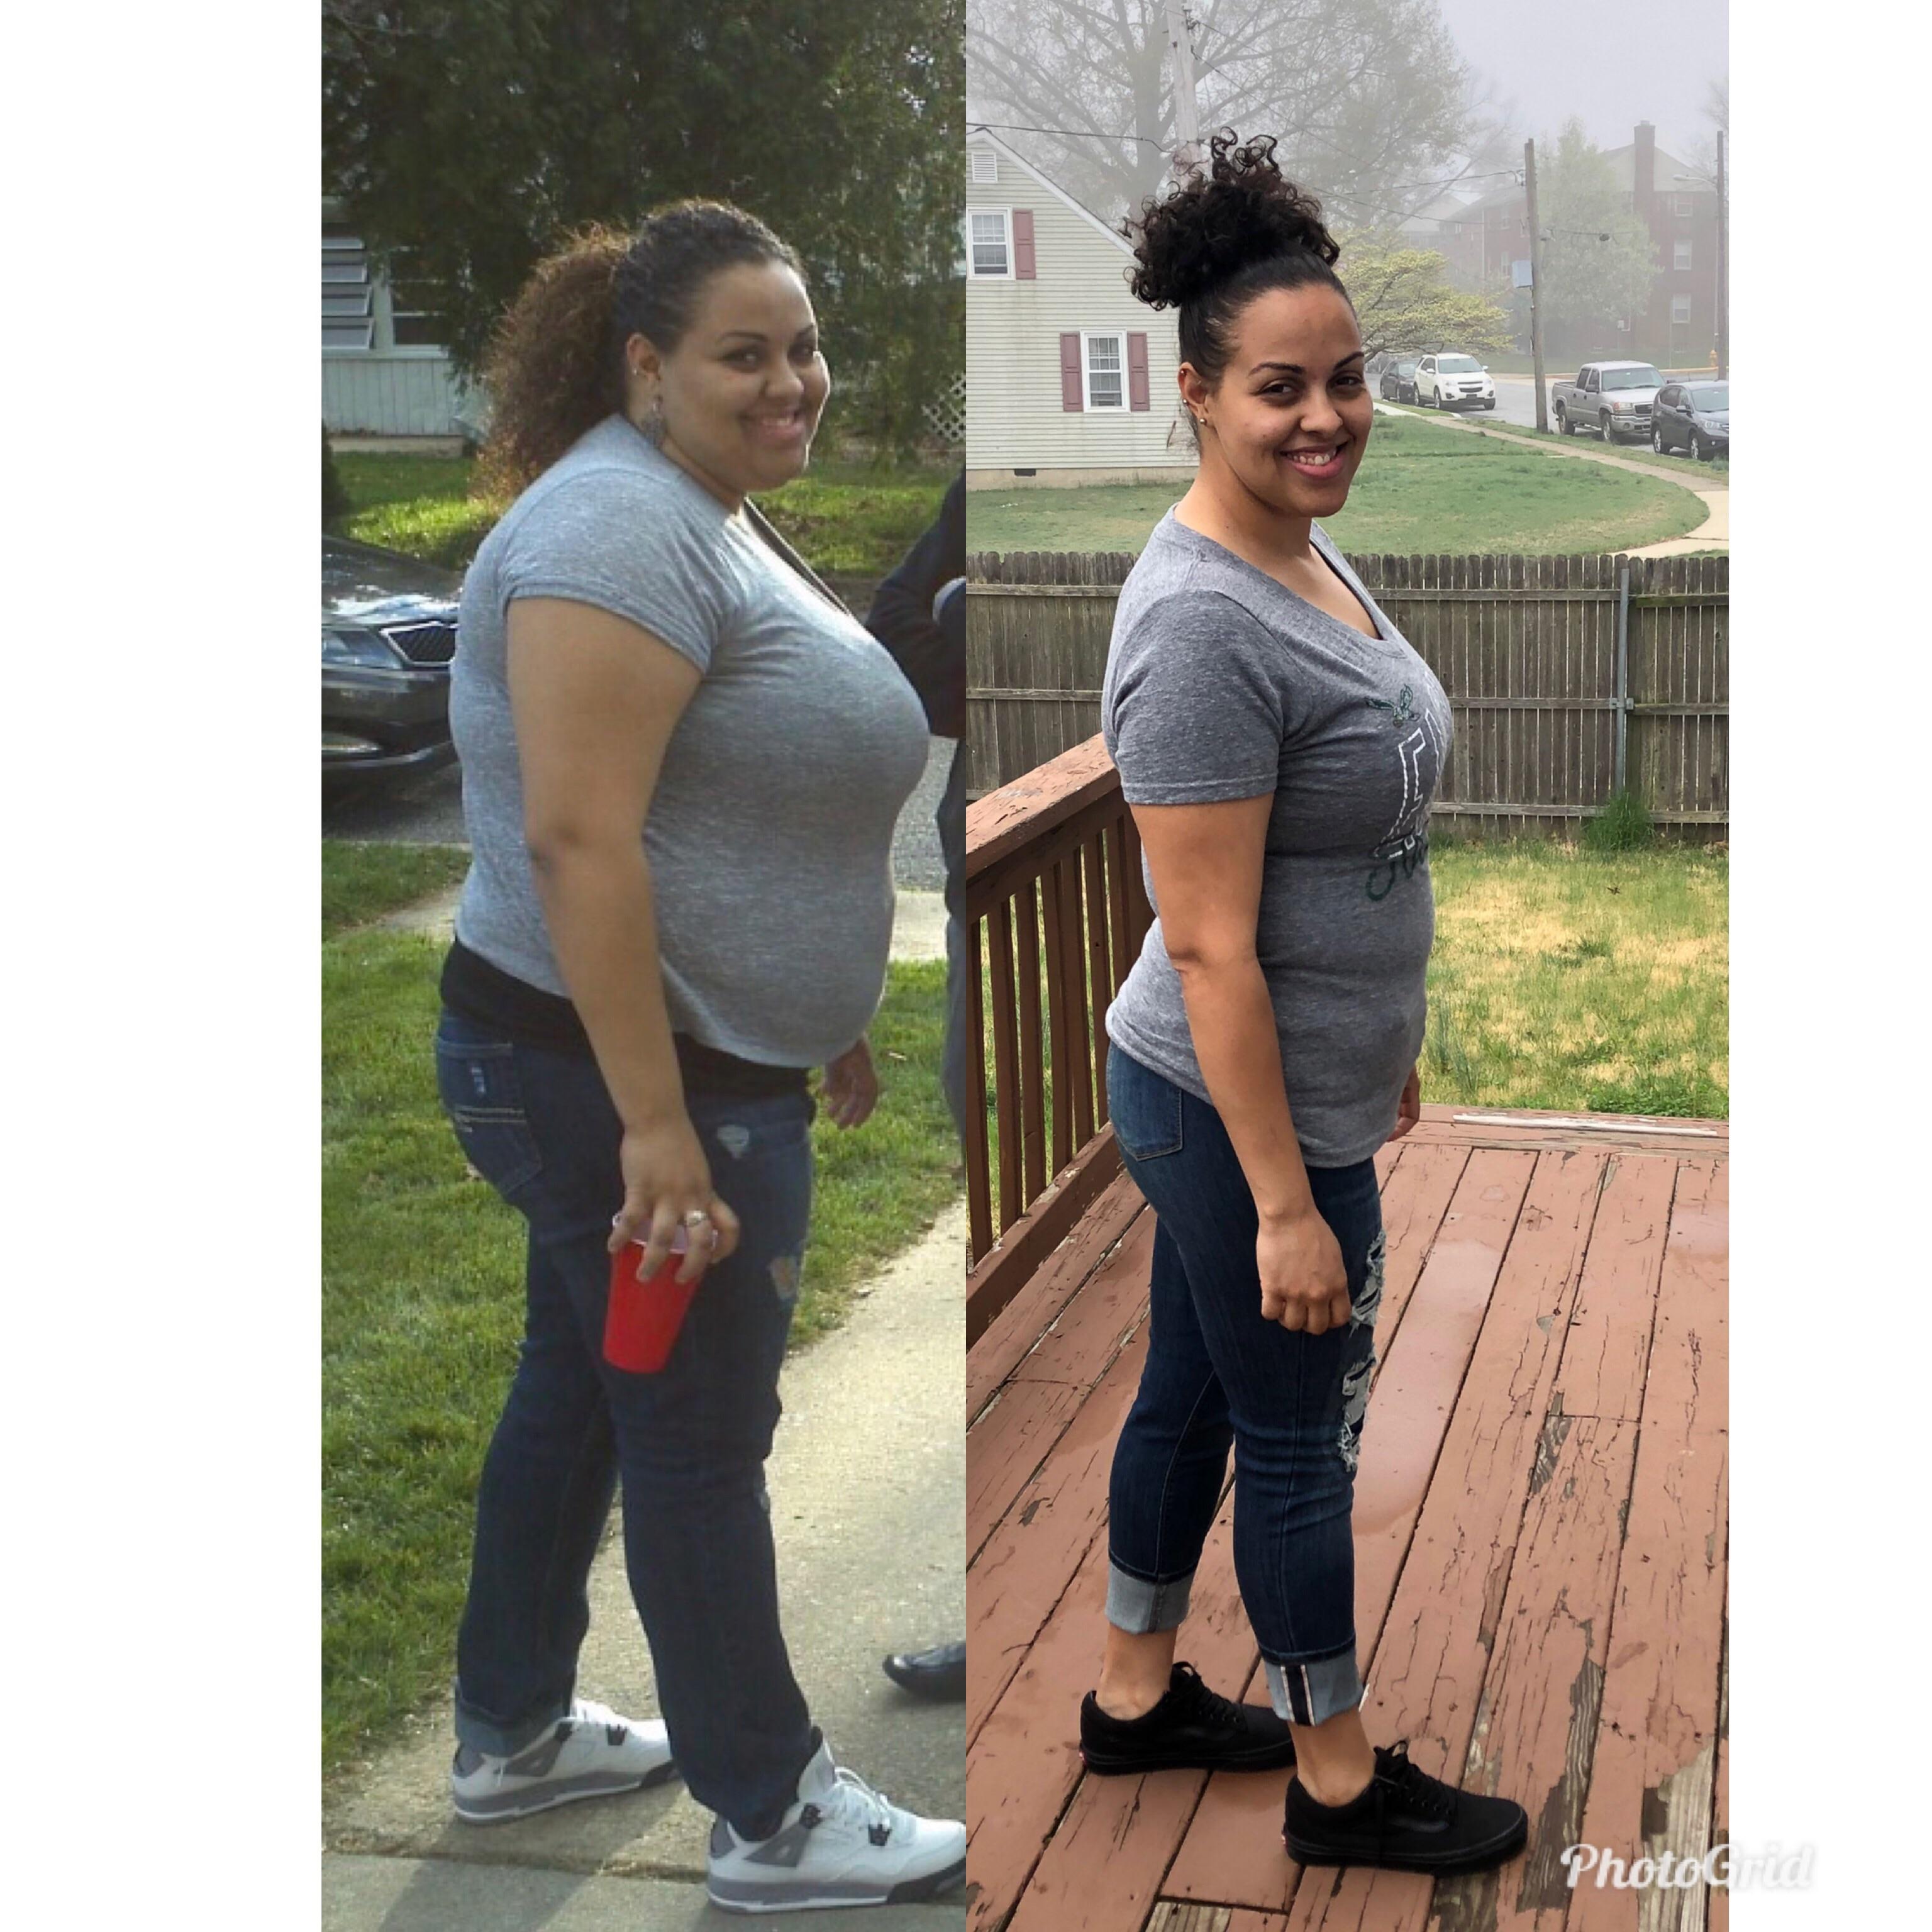 101 lbs Weight Loss 5 foot 5 Female 279 lbs to 178 lbs. 